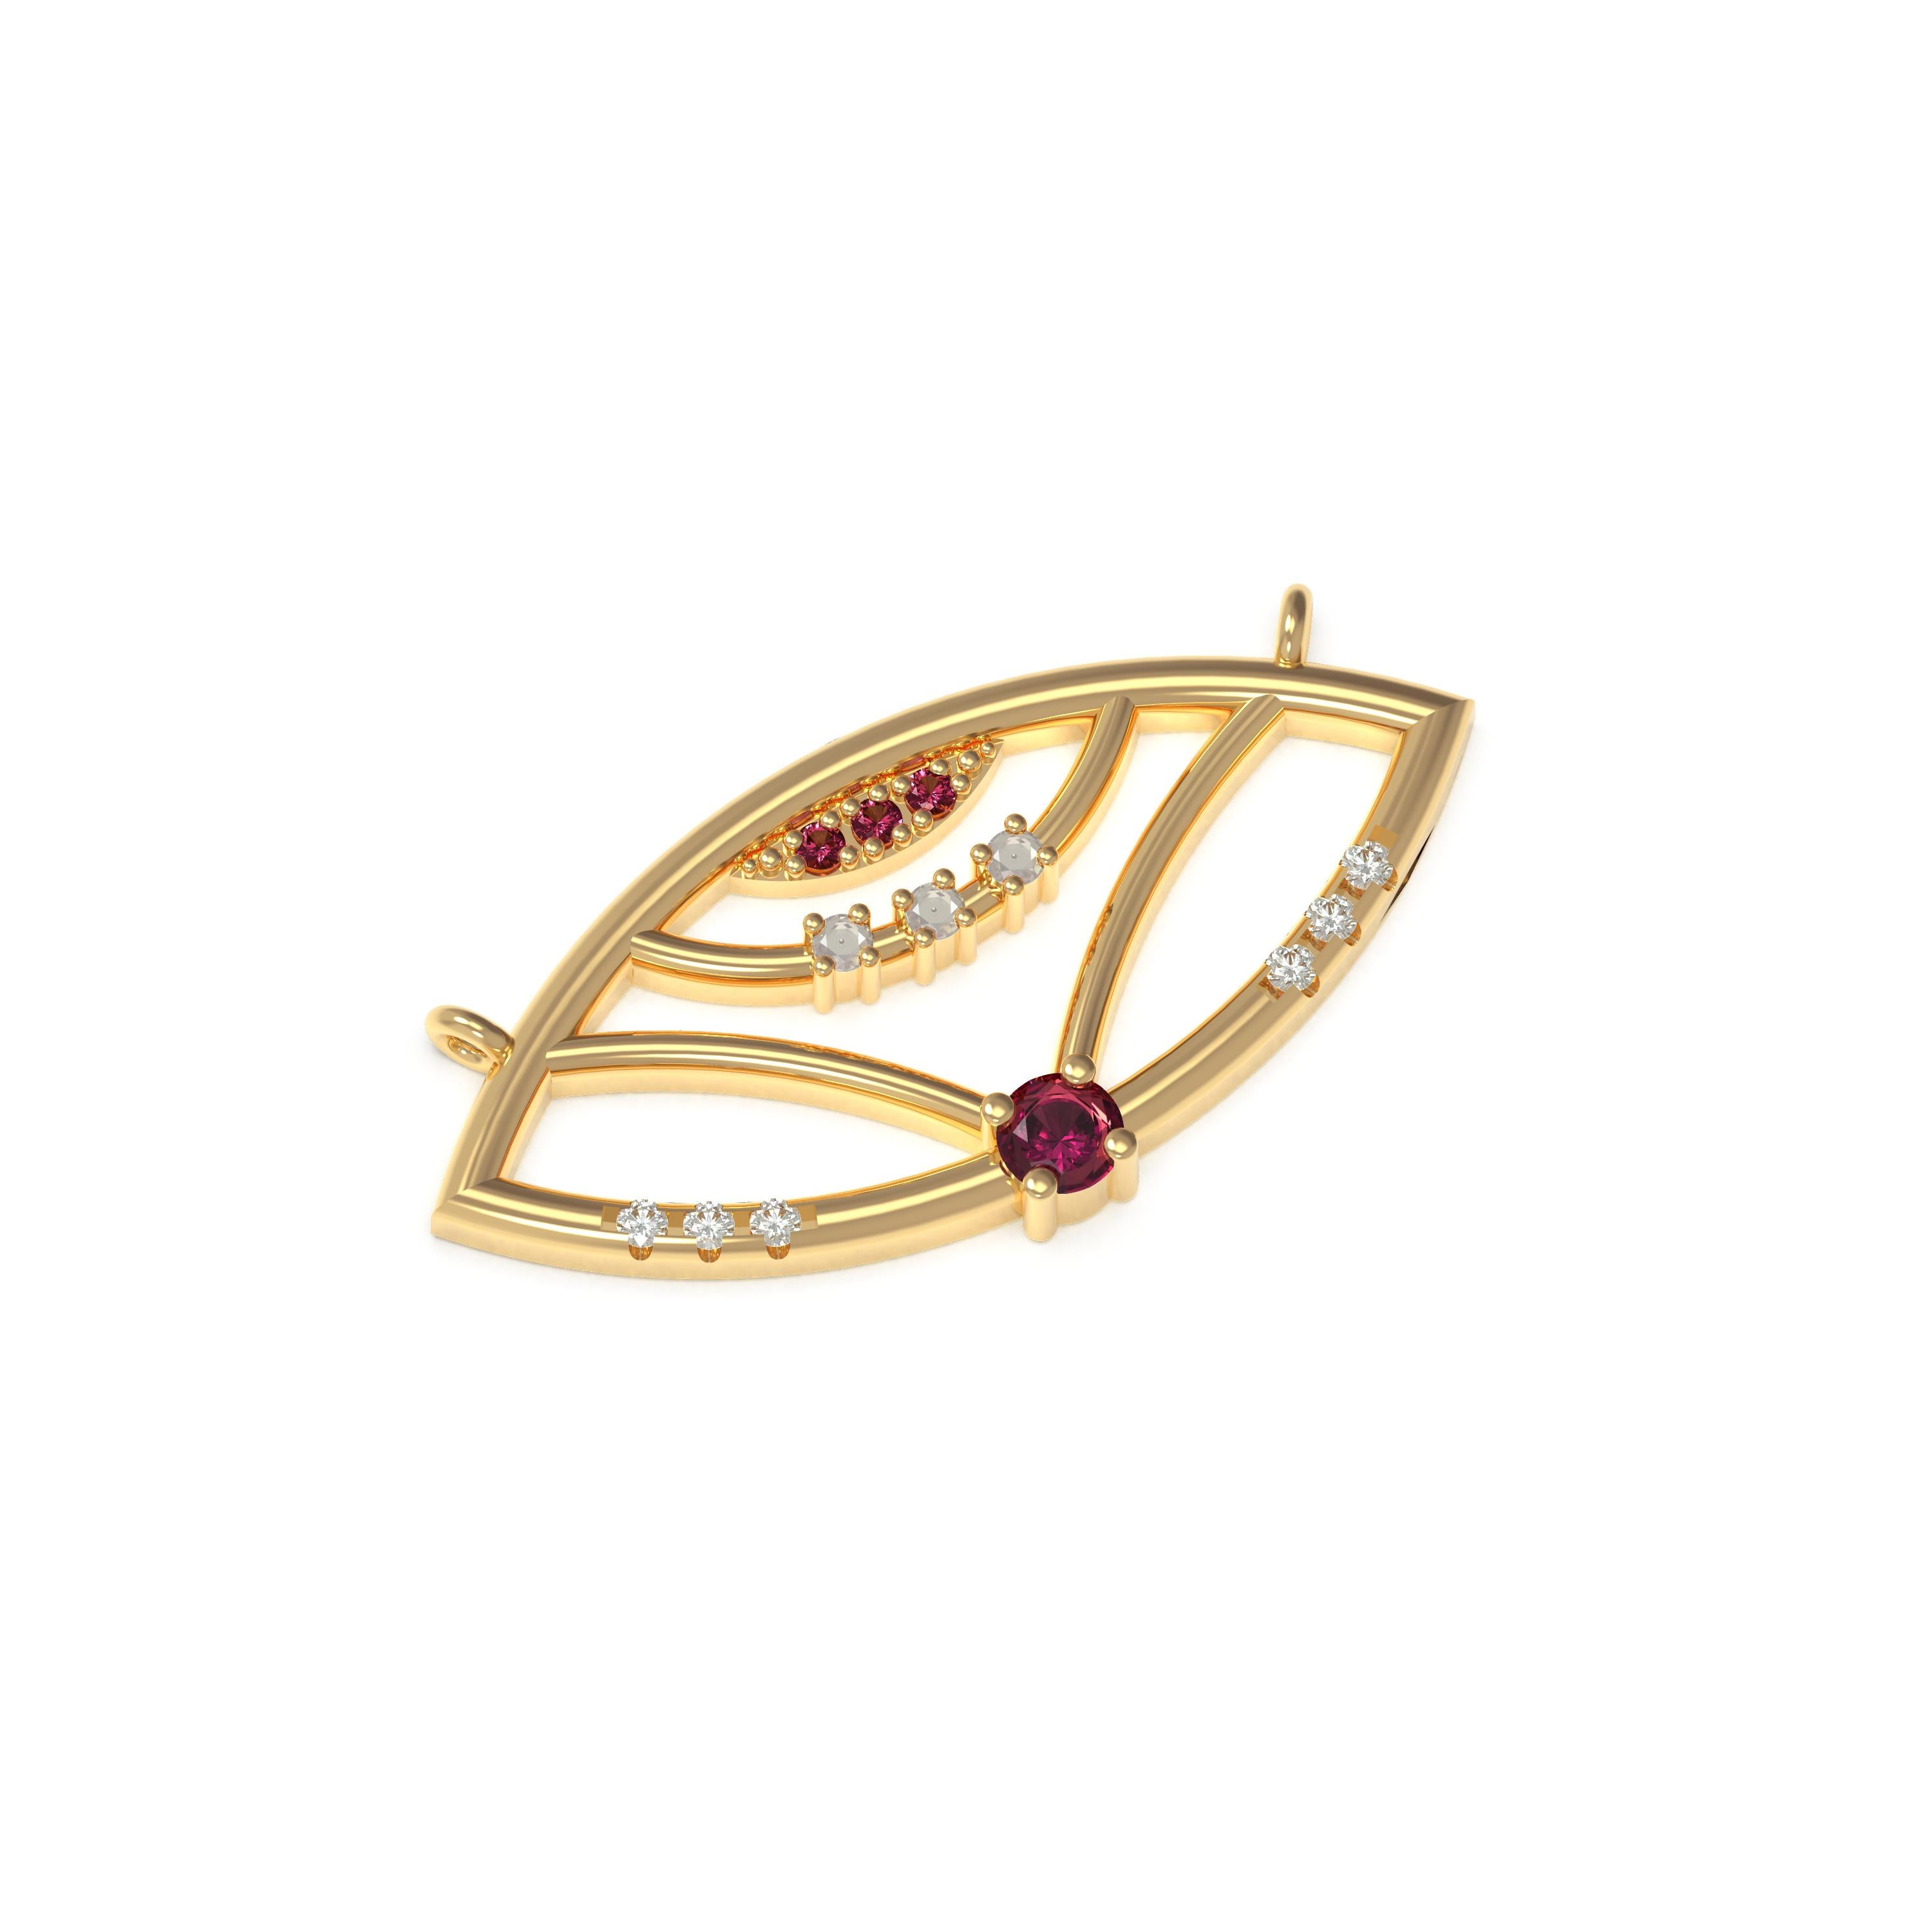 Designer: Alexia Gryllaki
Dimensions: motif 23x11mm, chain 450mm
Weight: approximately 3.6g 
Barcode: ING032P

The Interlocking Geometry pendant in 18 karat yellow gold with rubies approx. 0.12cts and round brilliant-cut diamonds approx.